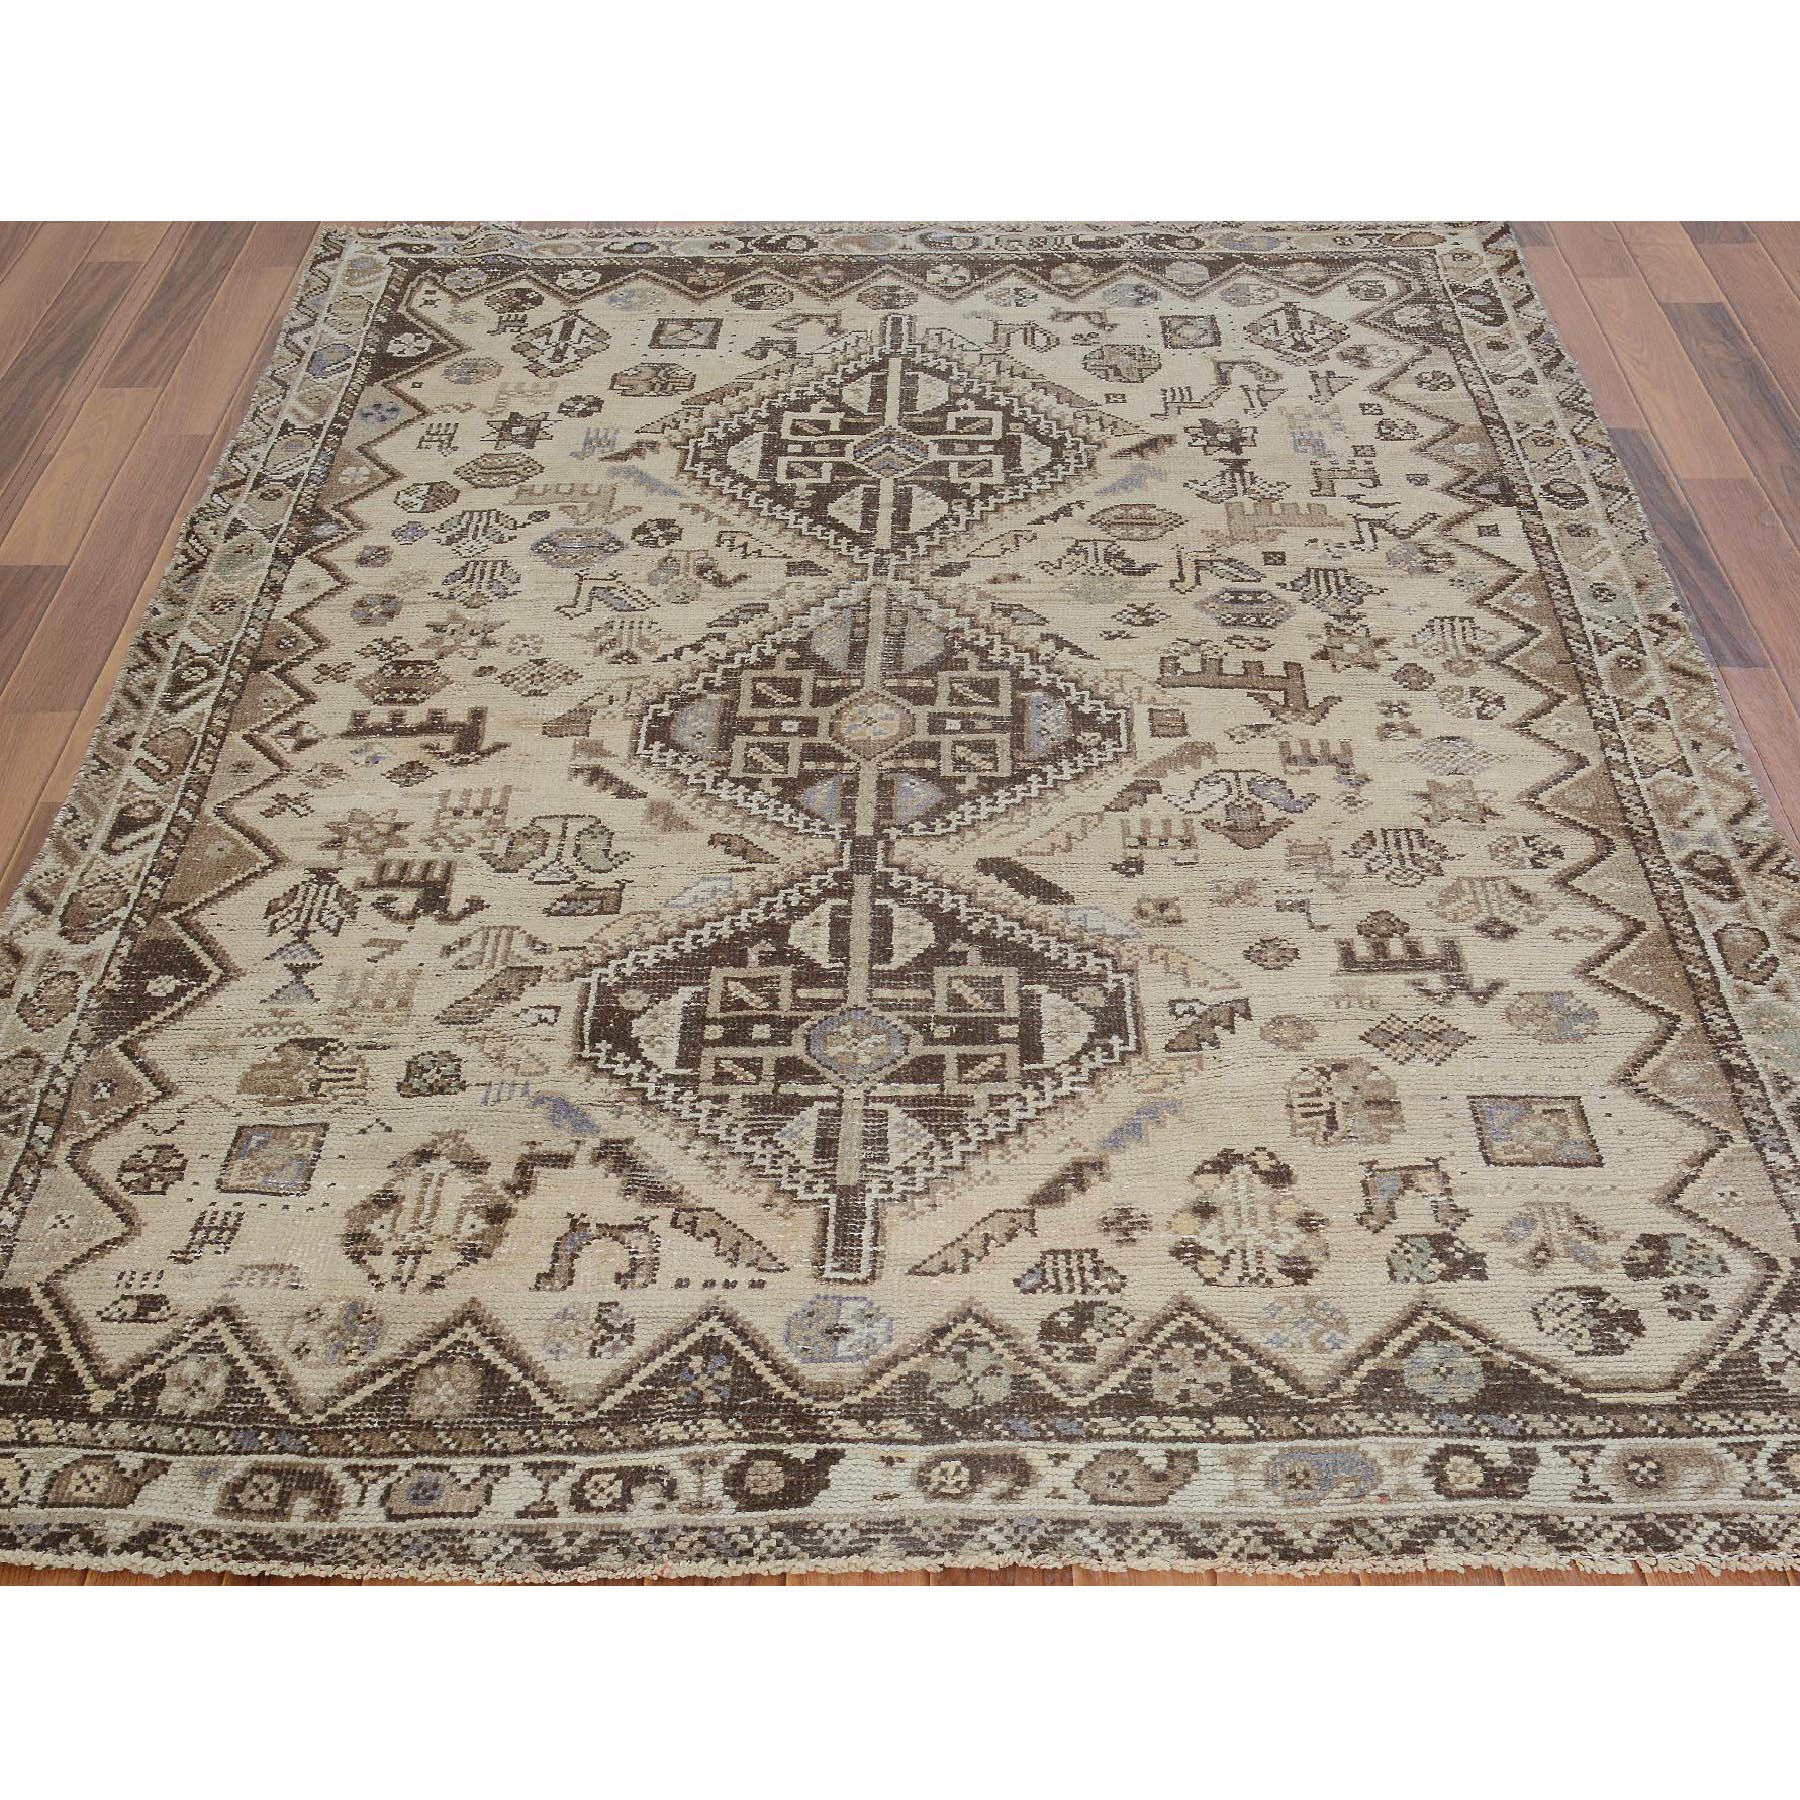 5-2 x7-3  Beige Old and Worn Down Persian Qashqai Pure Wool Hand Knotted Oriental Rug 